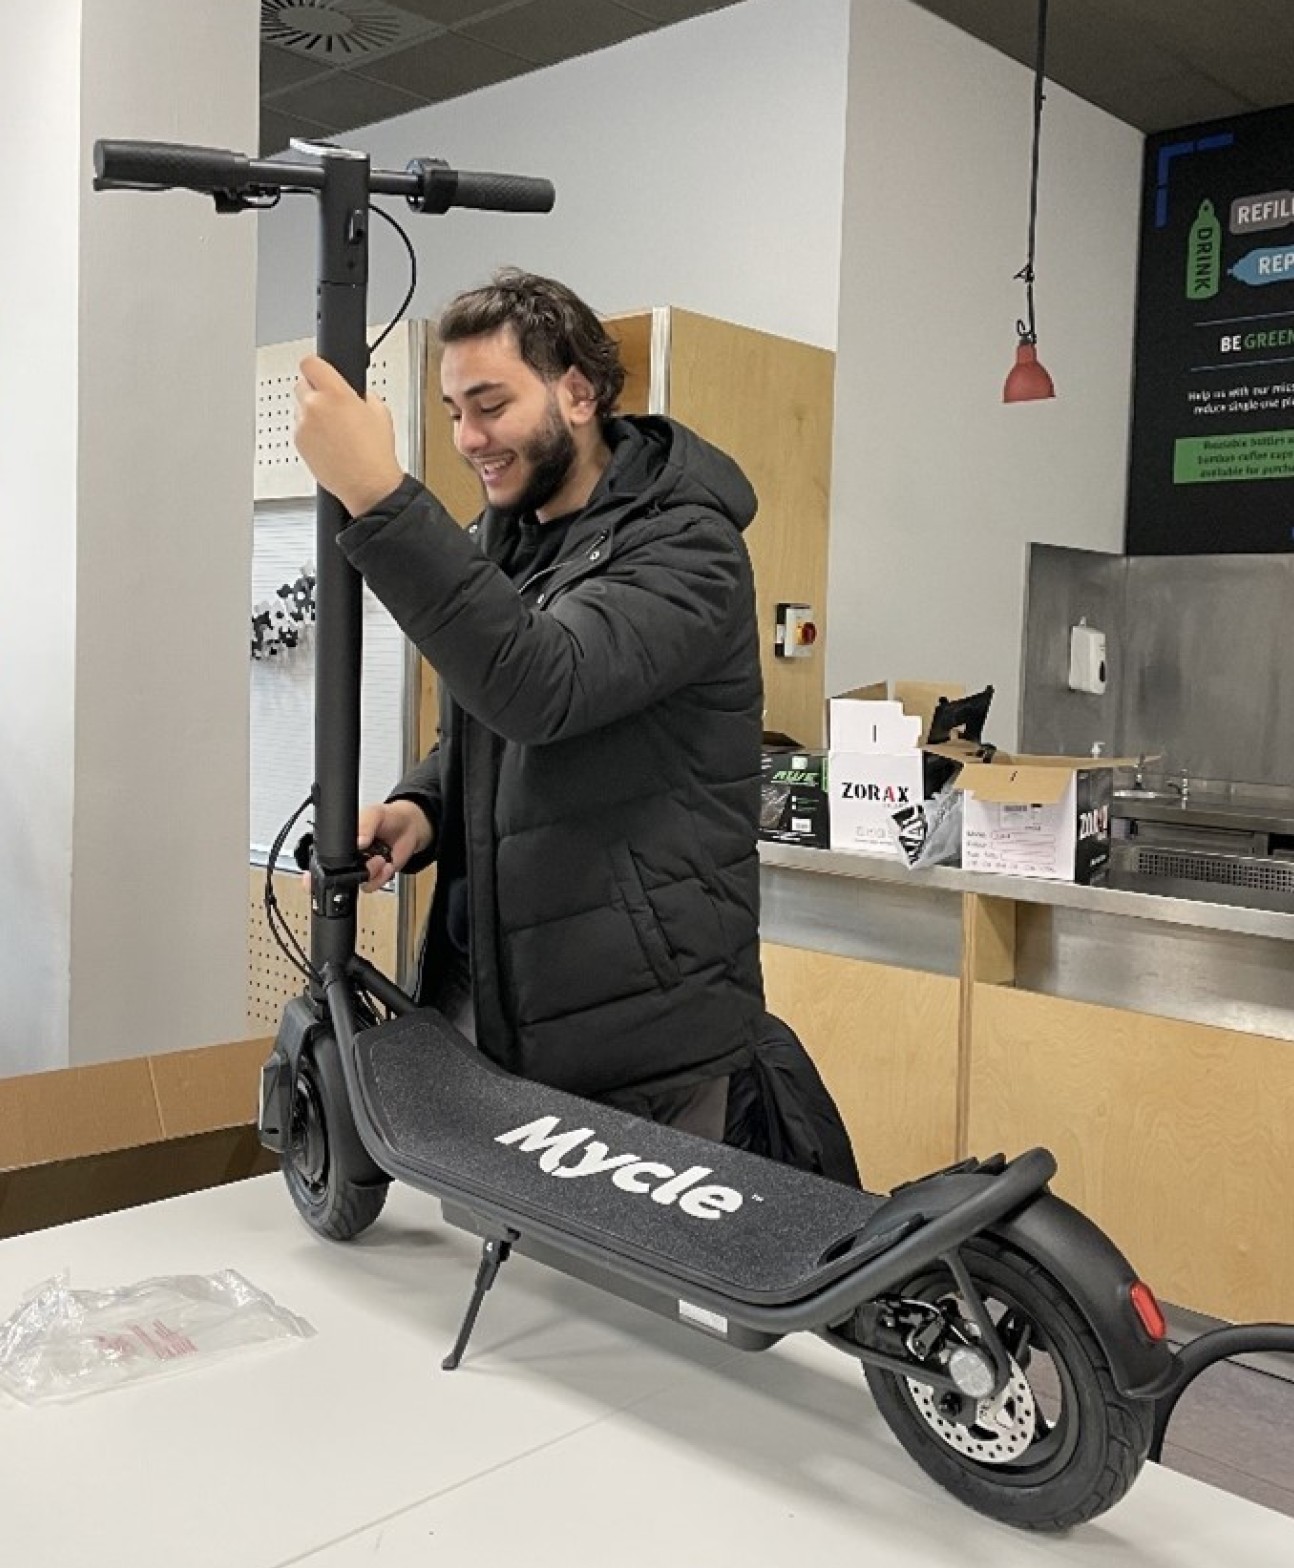 Male teenager in black coat holding onto the Mycle scooter he is building as it stands on a table